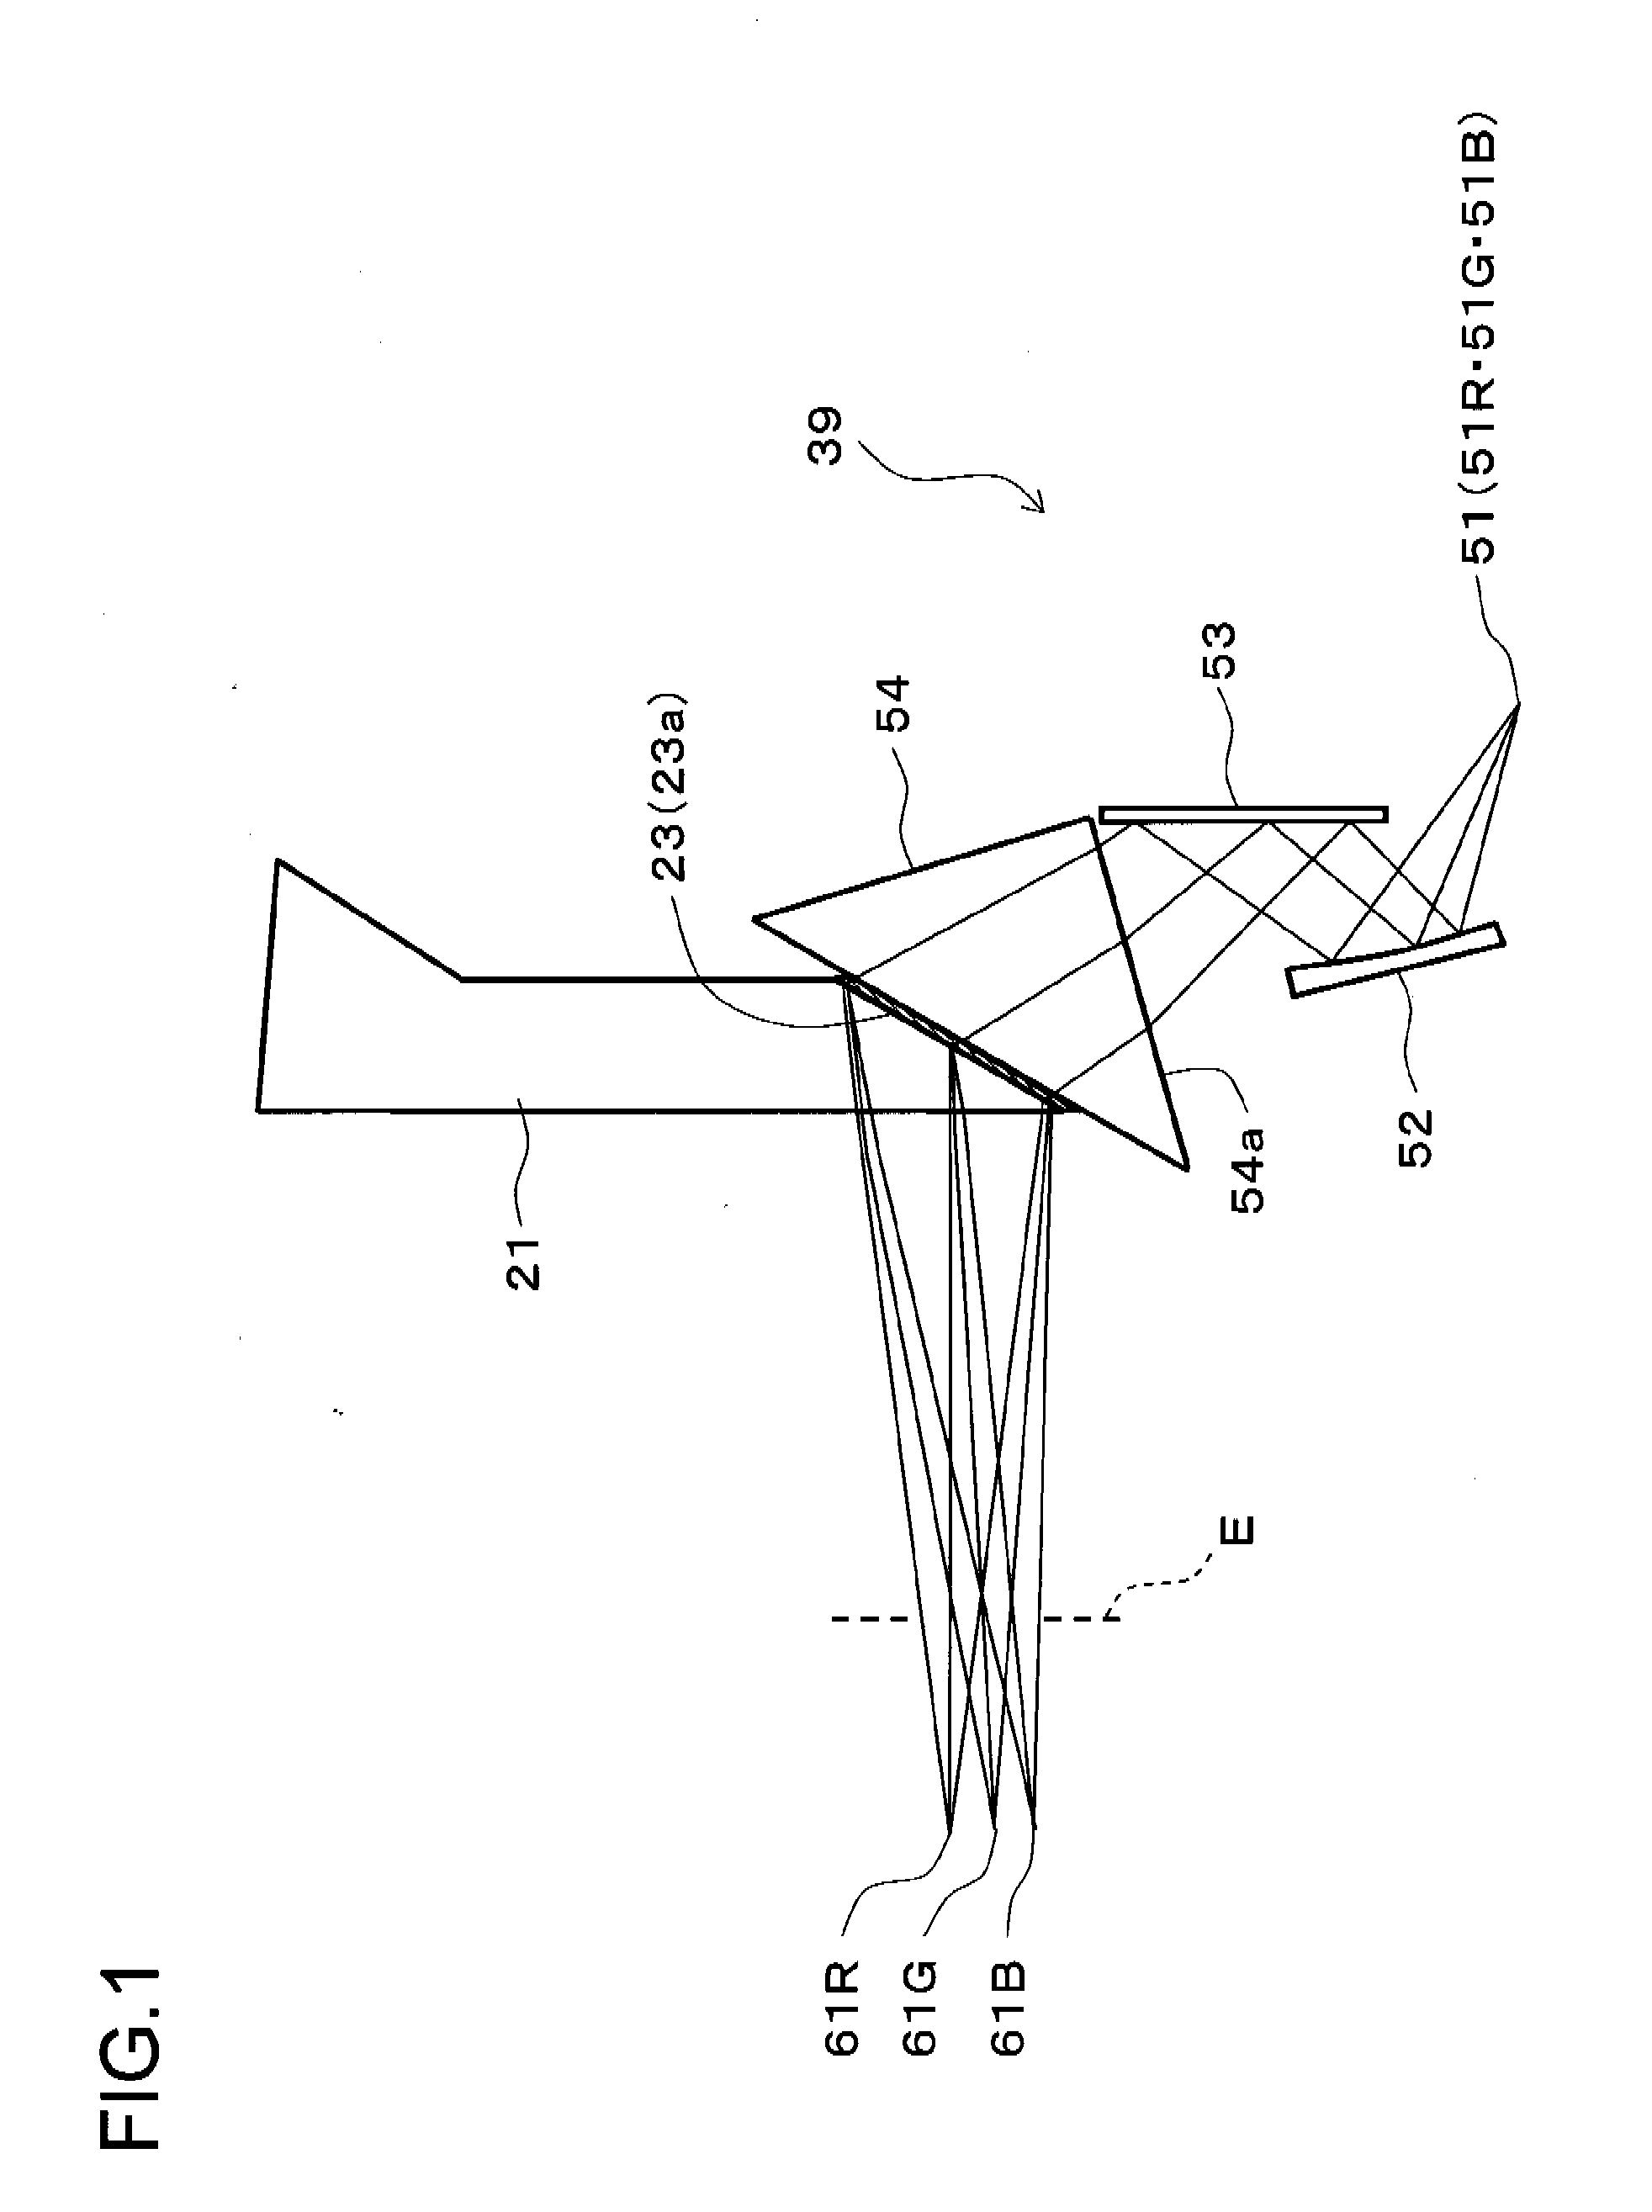 Hologram optical element, method of fabrication thereof, and image display apparatus